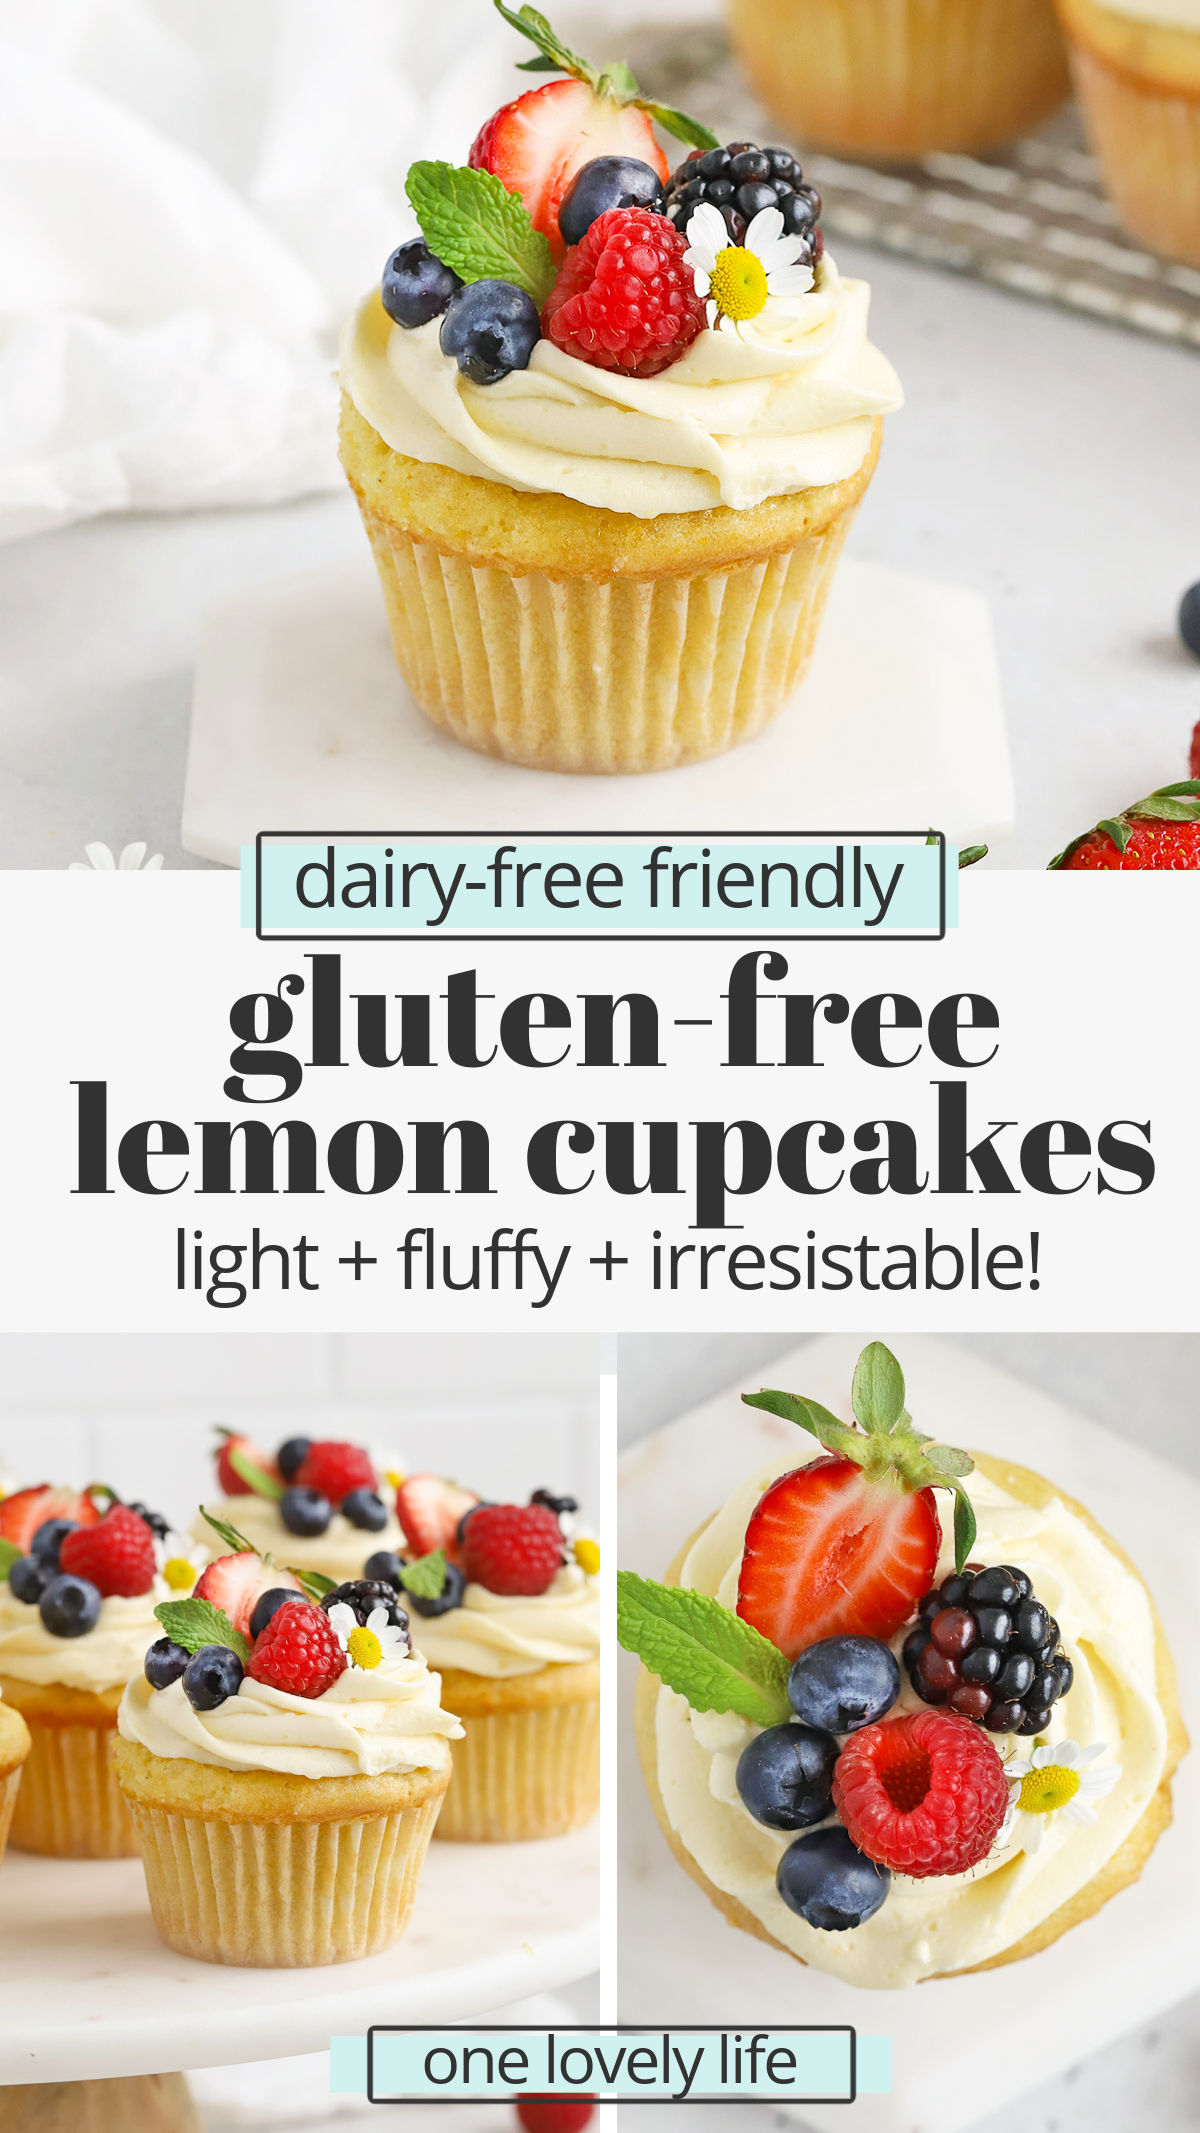 Gluten-Free Lemon Cupcakes with Lemon Frosting. These light, fluffy lemon cupcakes are lovely for any special occasion! (Dairy-Free Friendly) // Dairy-Free Lemon Frosting // Dairy Free Lemon Cupcakes // Lemon Buttercream // Dairy Free Lemon Buttercream // Gluten Free Cupcakes // Gluten Free Lemon Cupcakes Recipe // Gluten-Free Cupcake Recipe